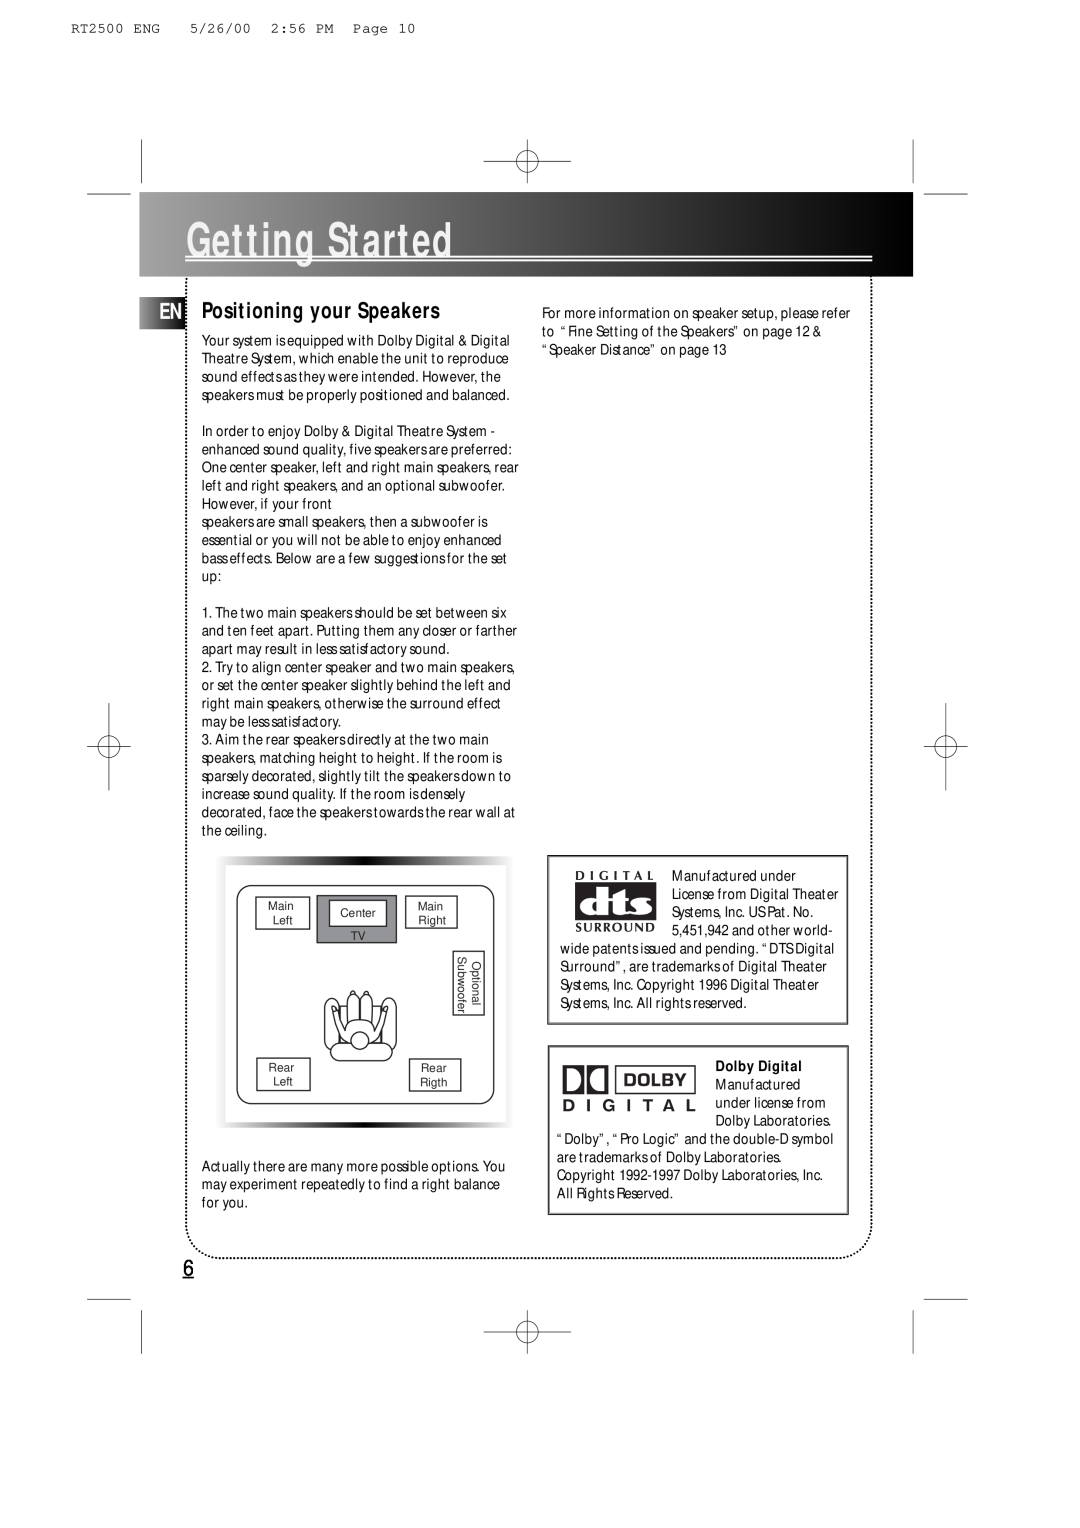 RCA RT2500R user manual ENPositioning your Speakers, GettingStarted, Dolby Digital 